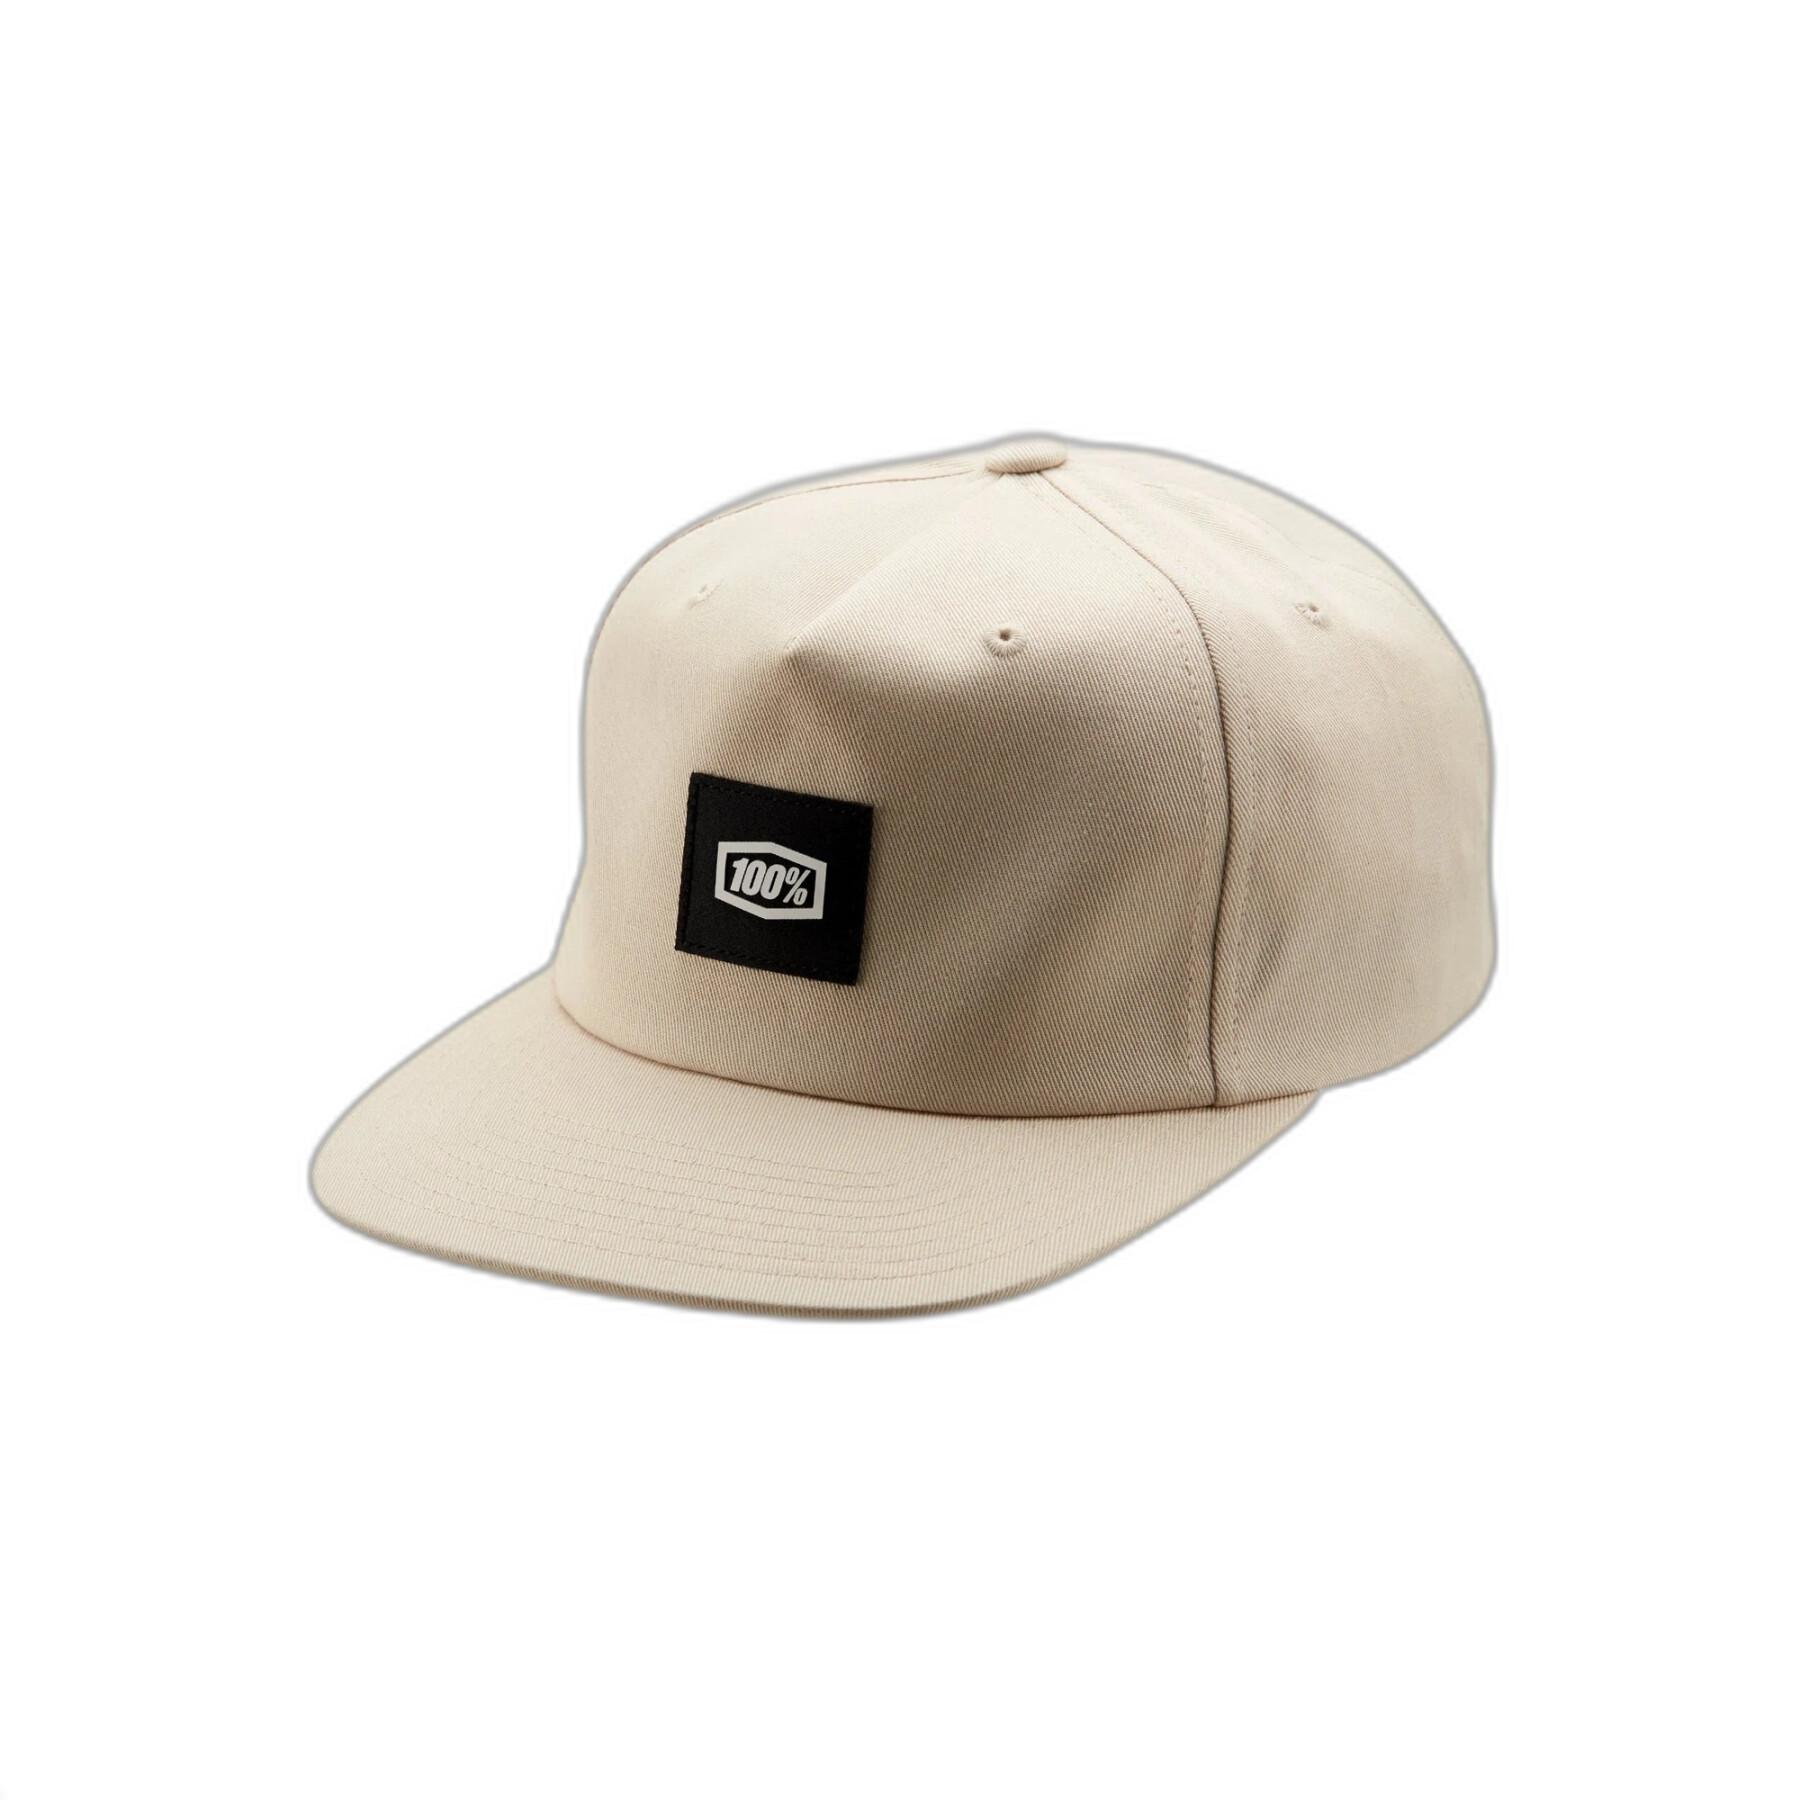 Cap 100% lincoln snapback unstructured lyp fit